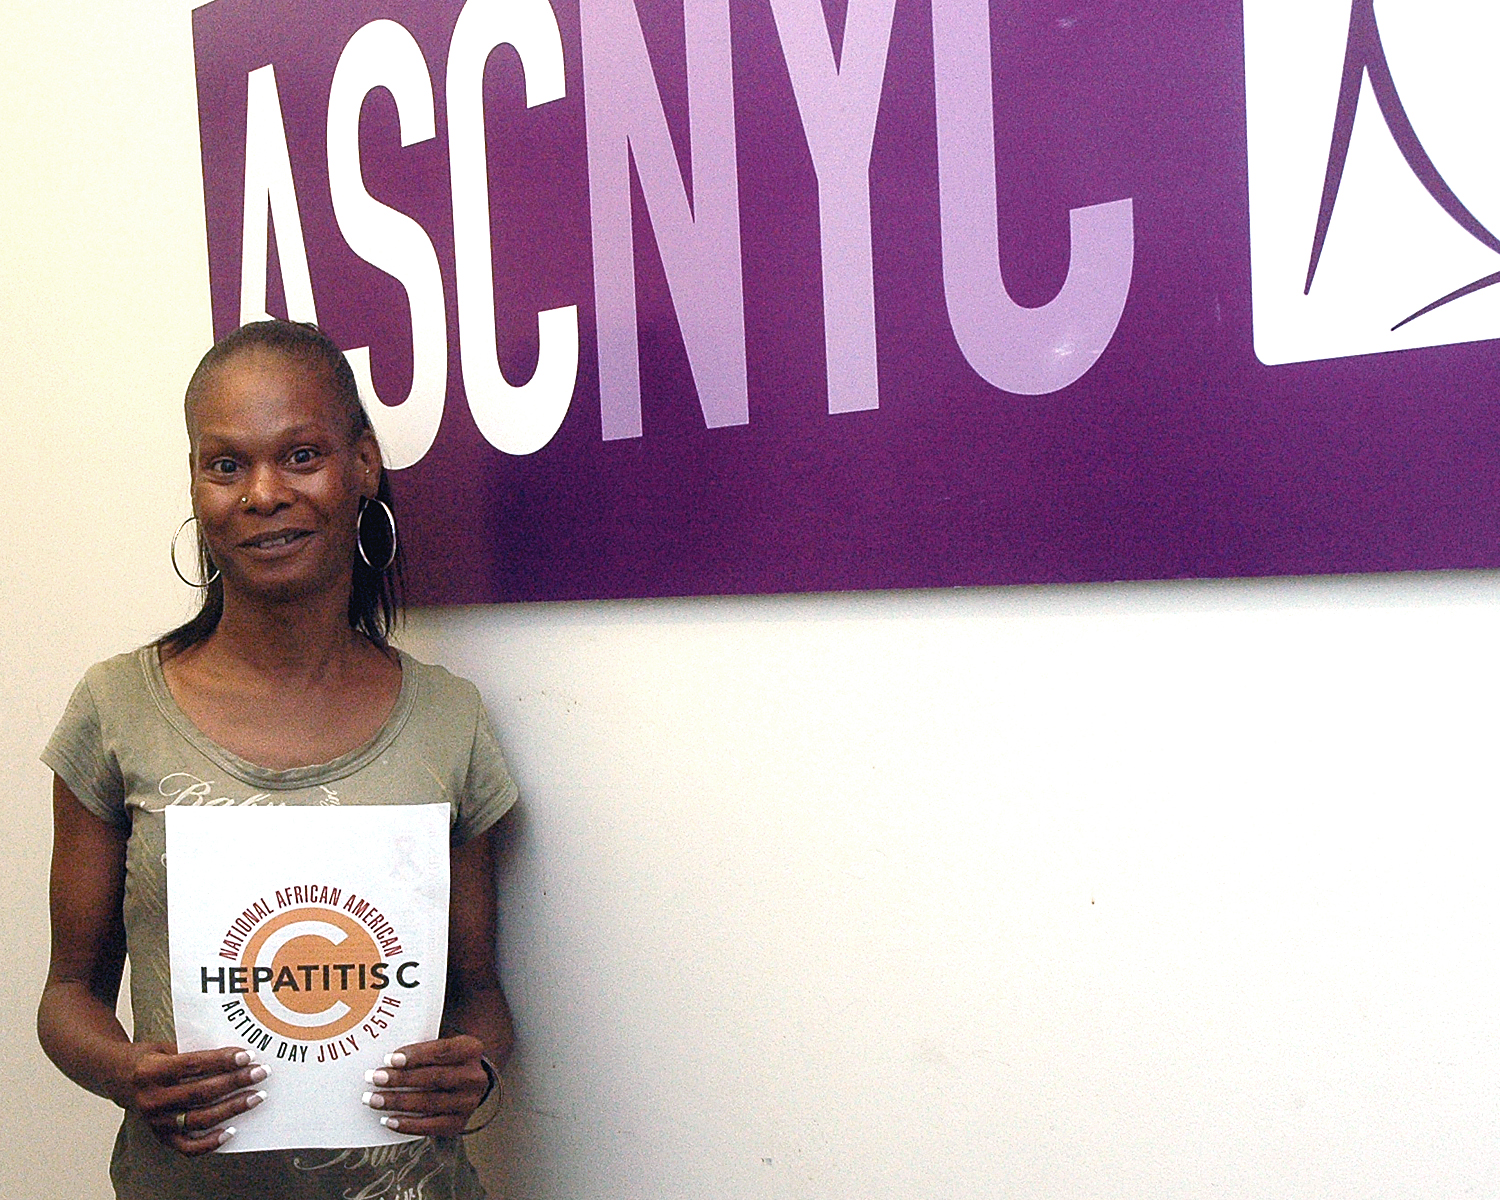 A member of the ASCNYC Family showing their support